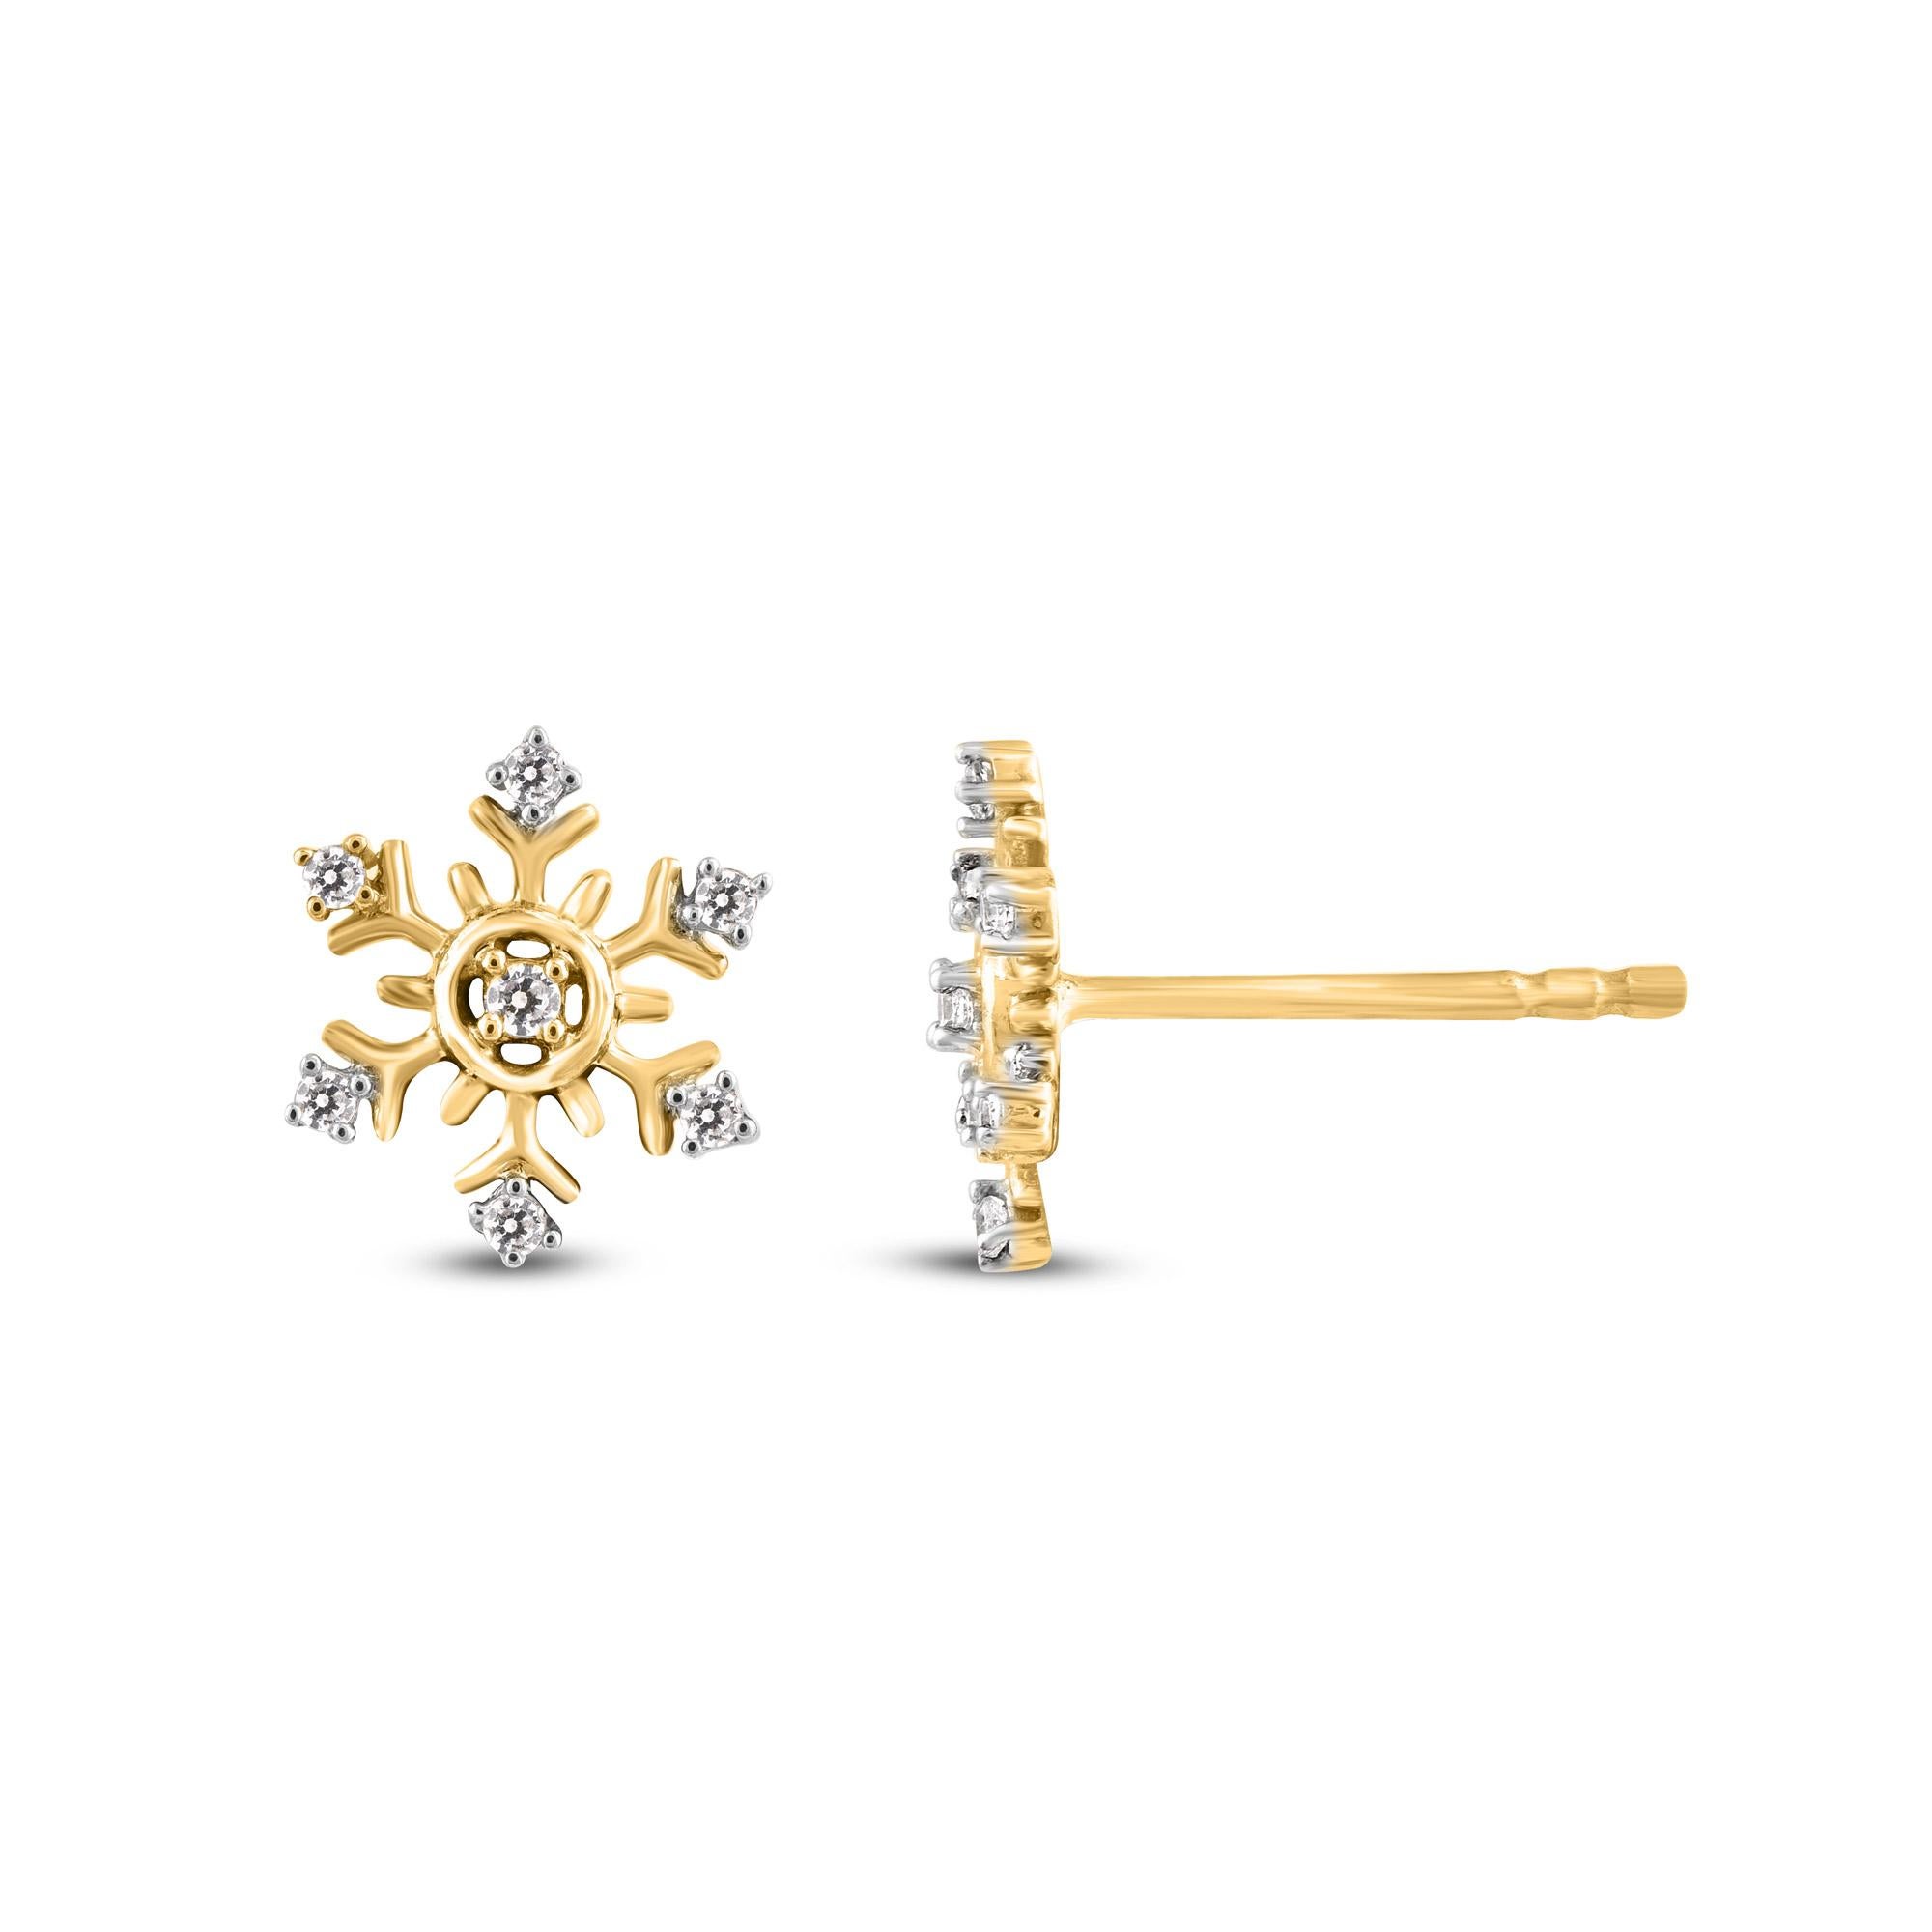 Top off your favorite looks with these scintillating snowflake stud earrings. These stud earrings crafted in 14 karat yellow gold and captivates with 0.10 carat natural round diamonds, studded with 14 round brilliant cut diamonds in prong setting,